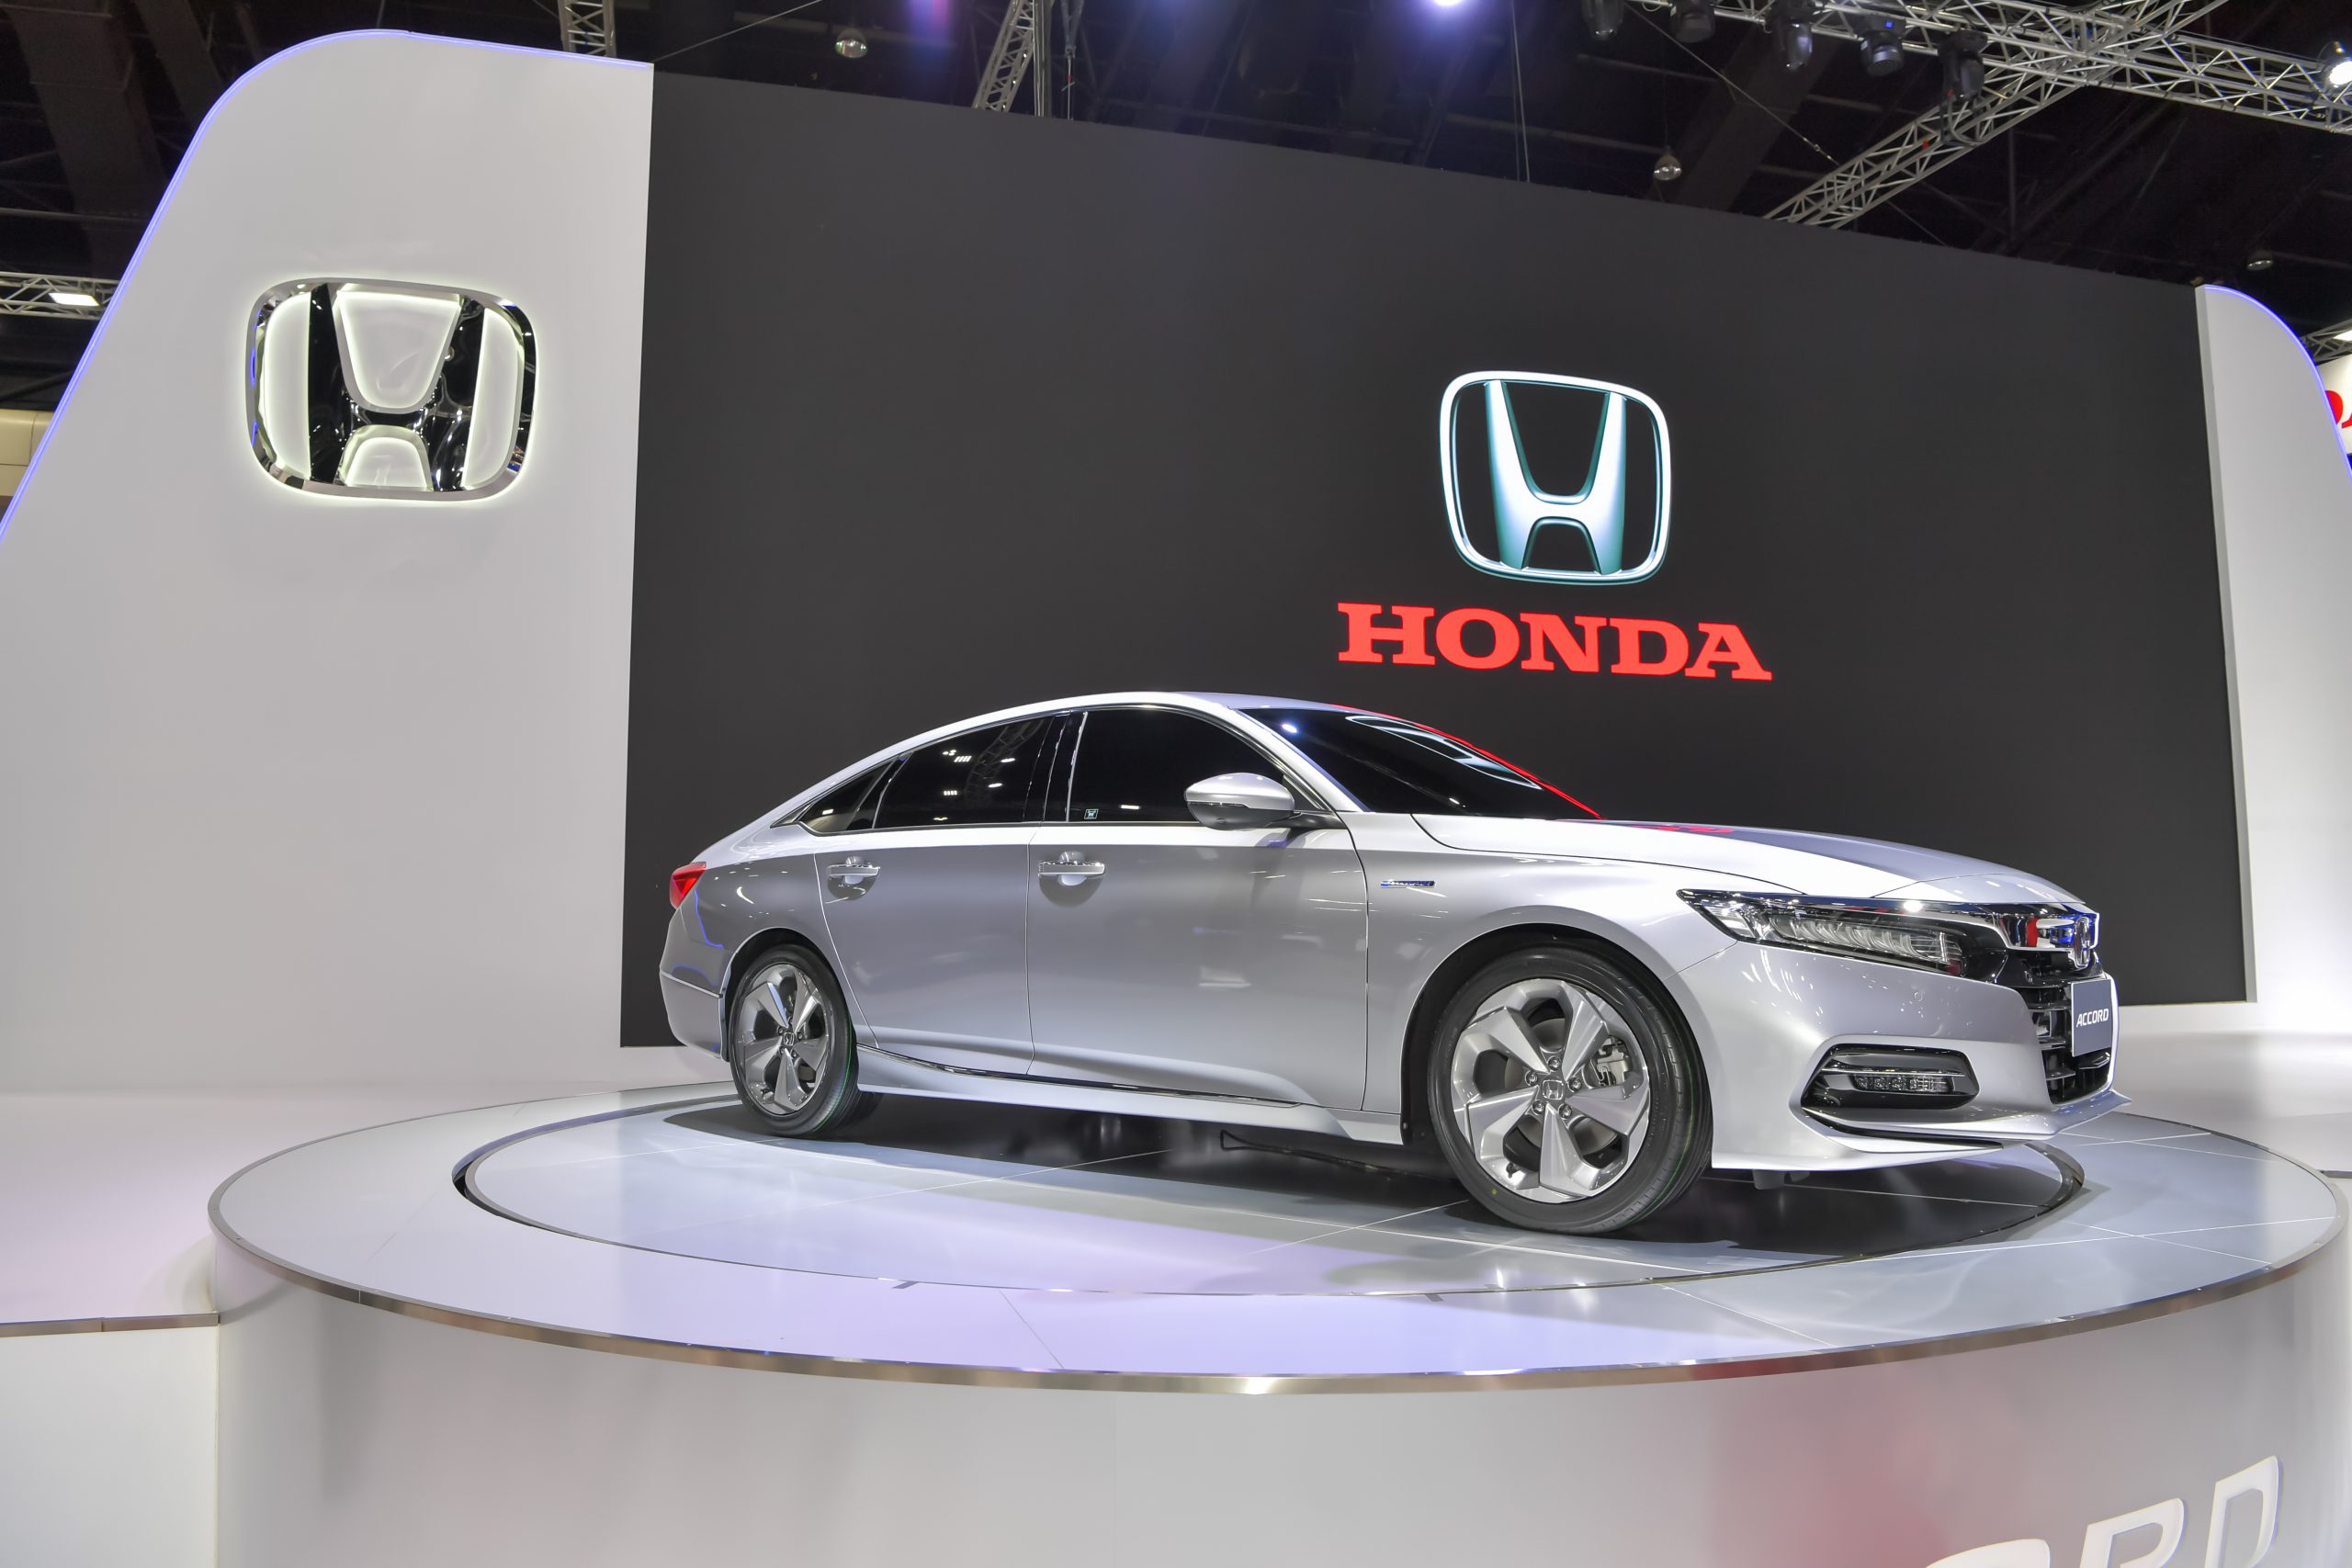 Honda is facing a lawsuit alleging a “parasitic draining” defect in certain vehicles’ batteries.